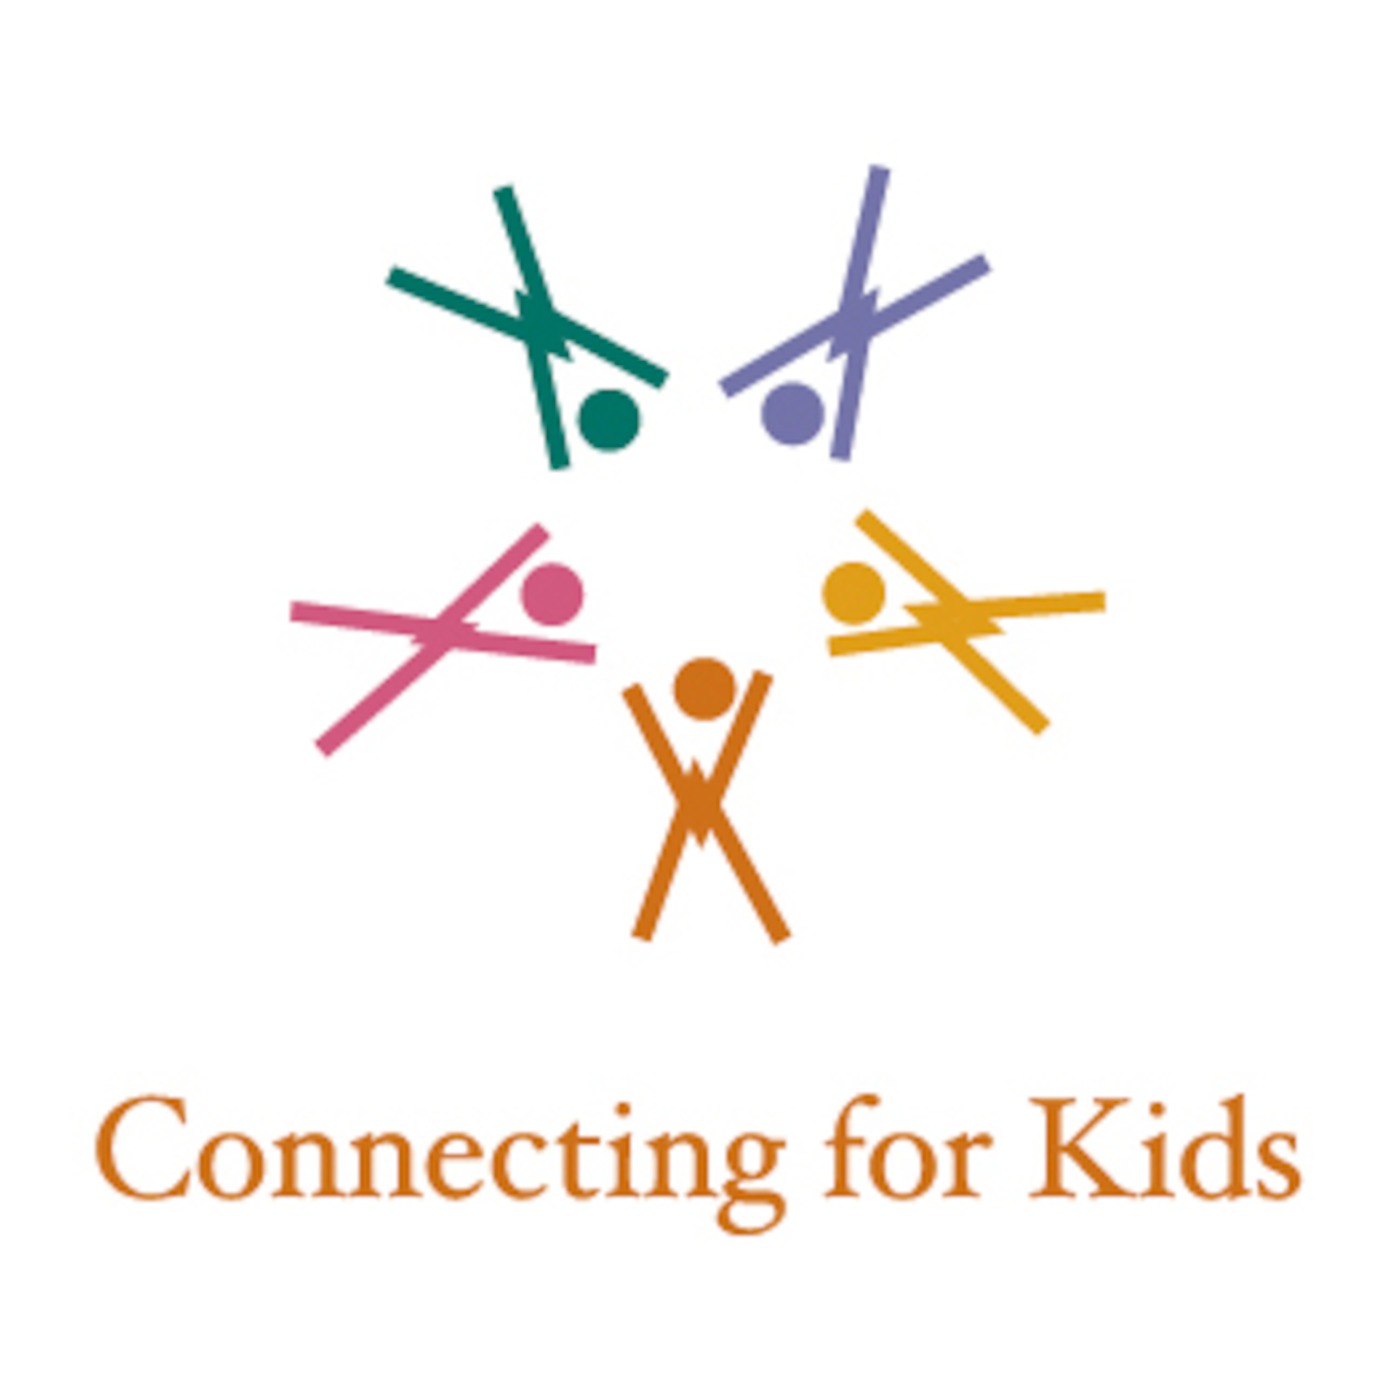 Connecting for Kids